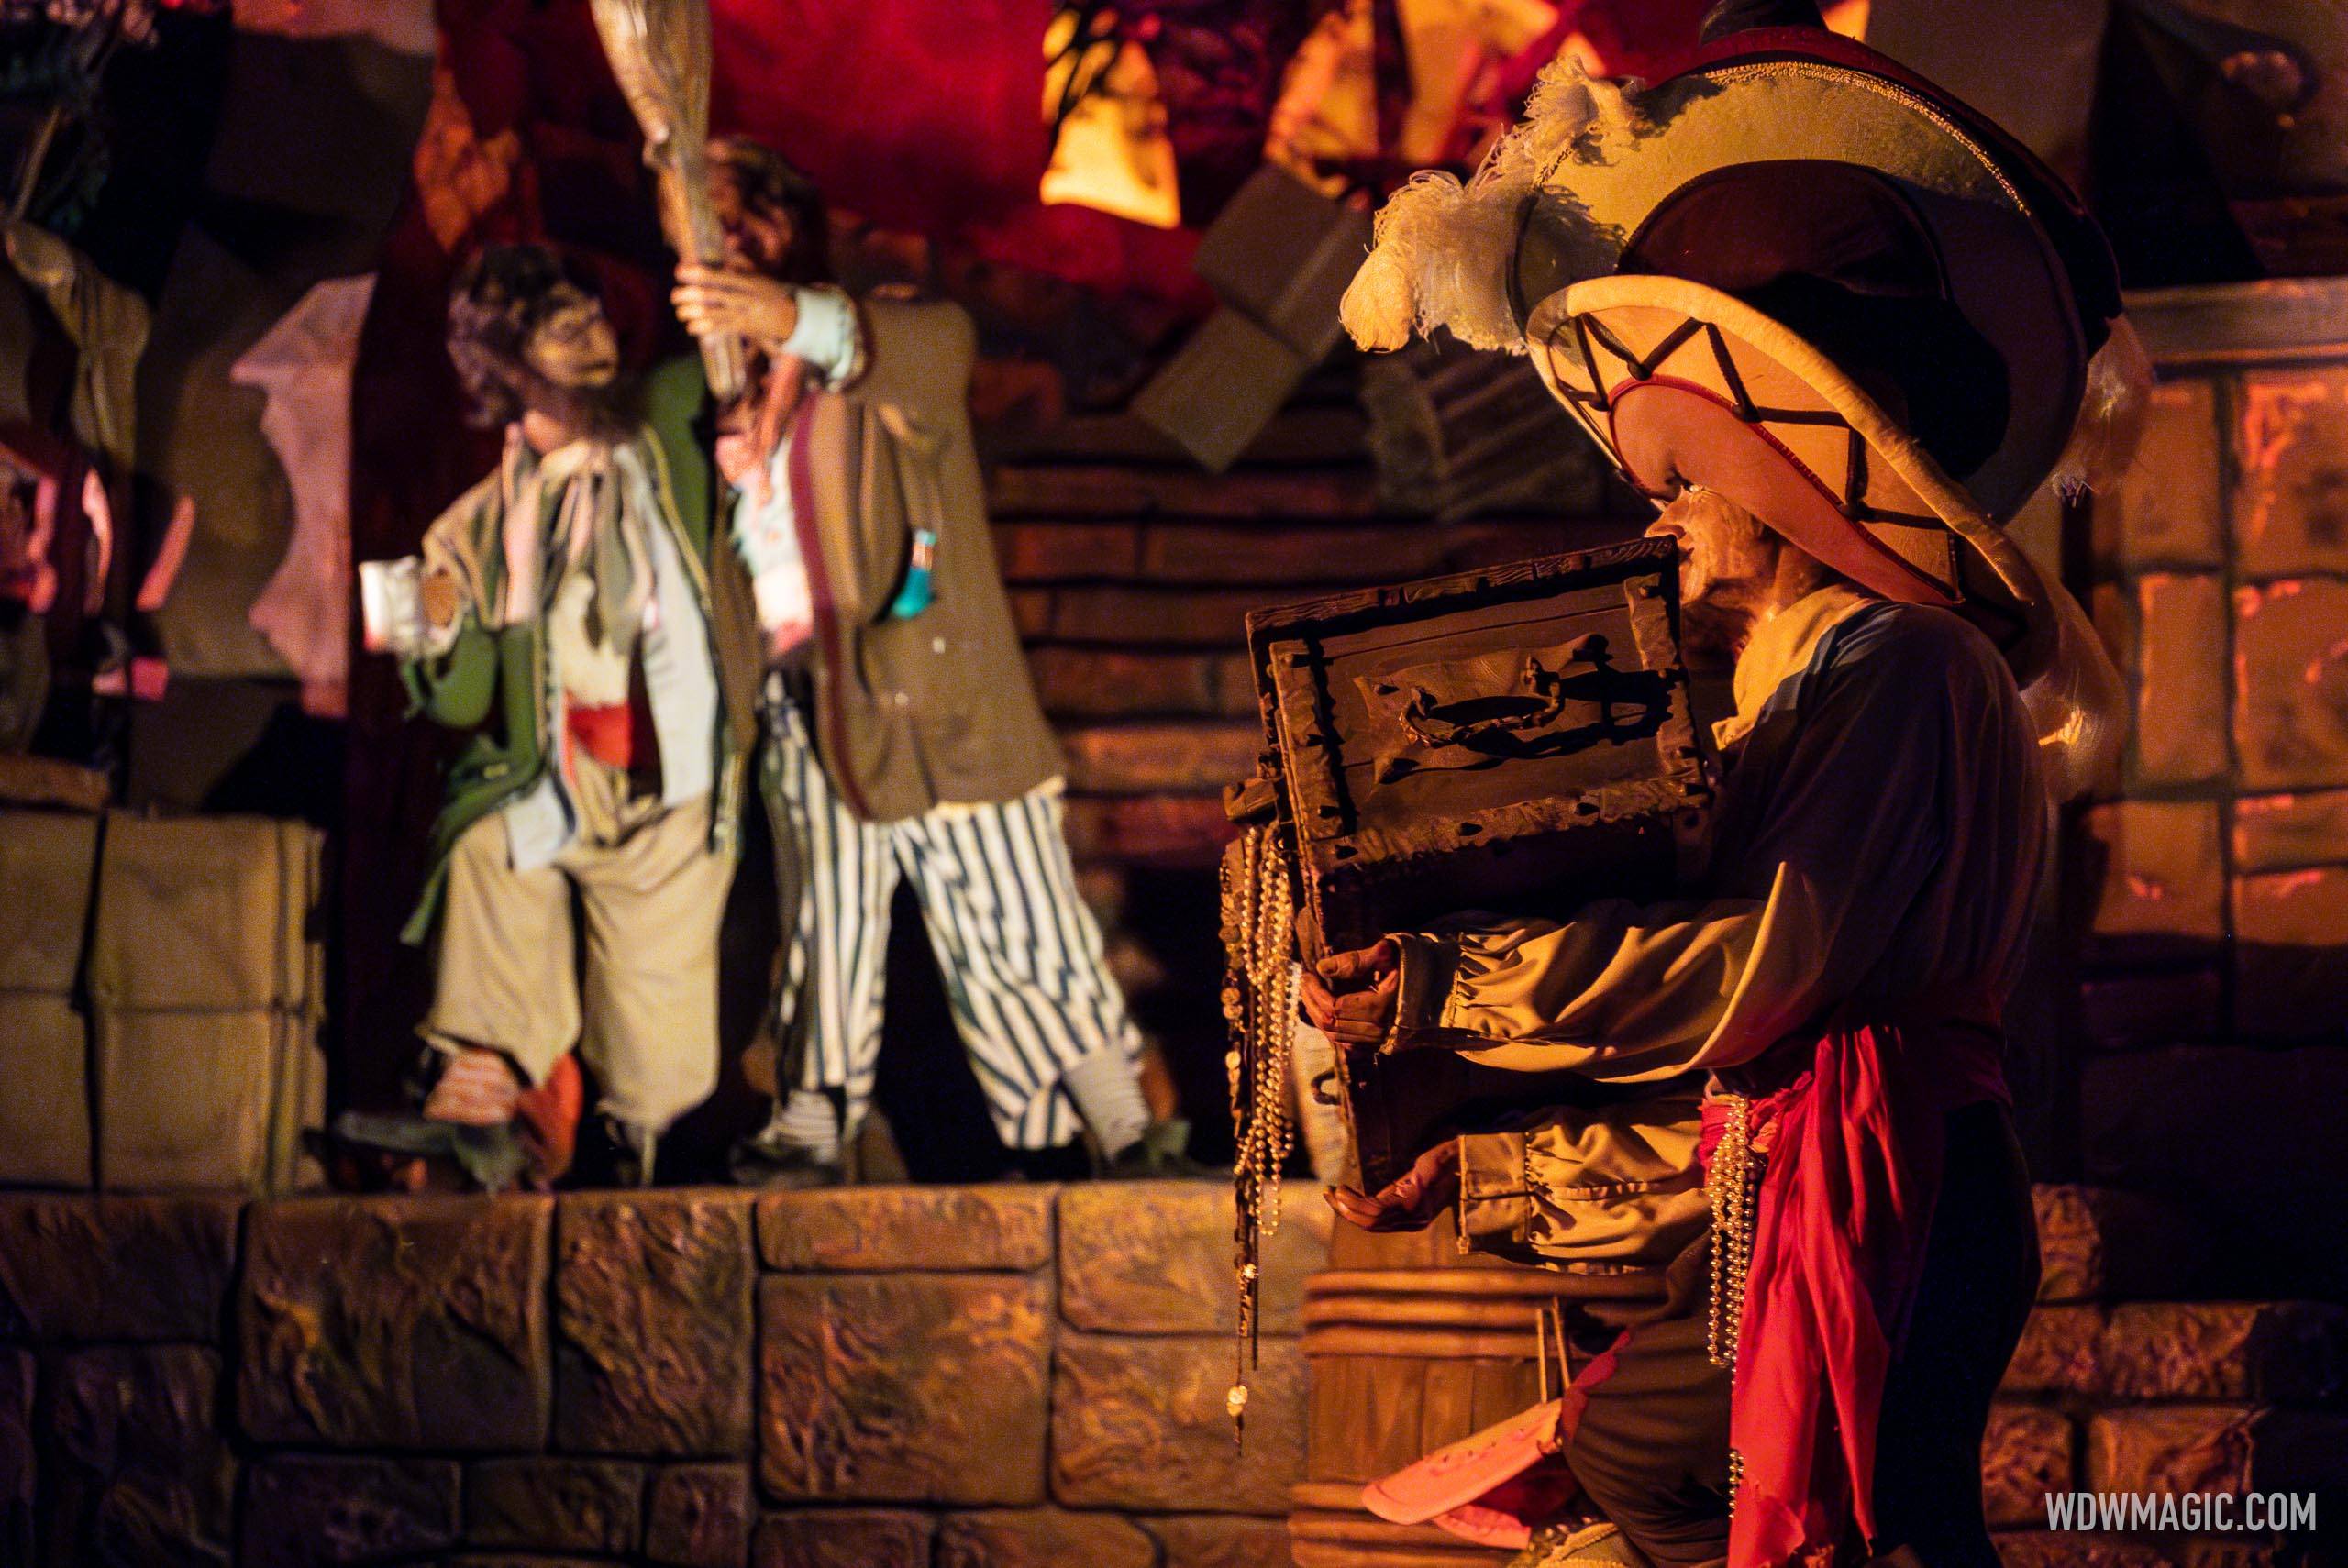 Pirates of the Caribbean reopens after phase 1